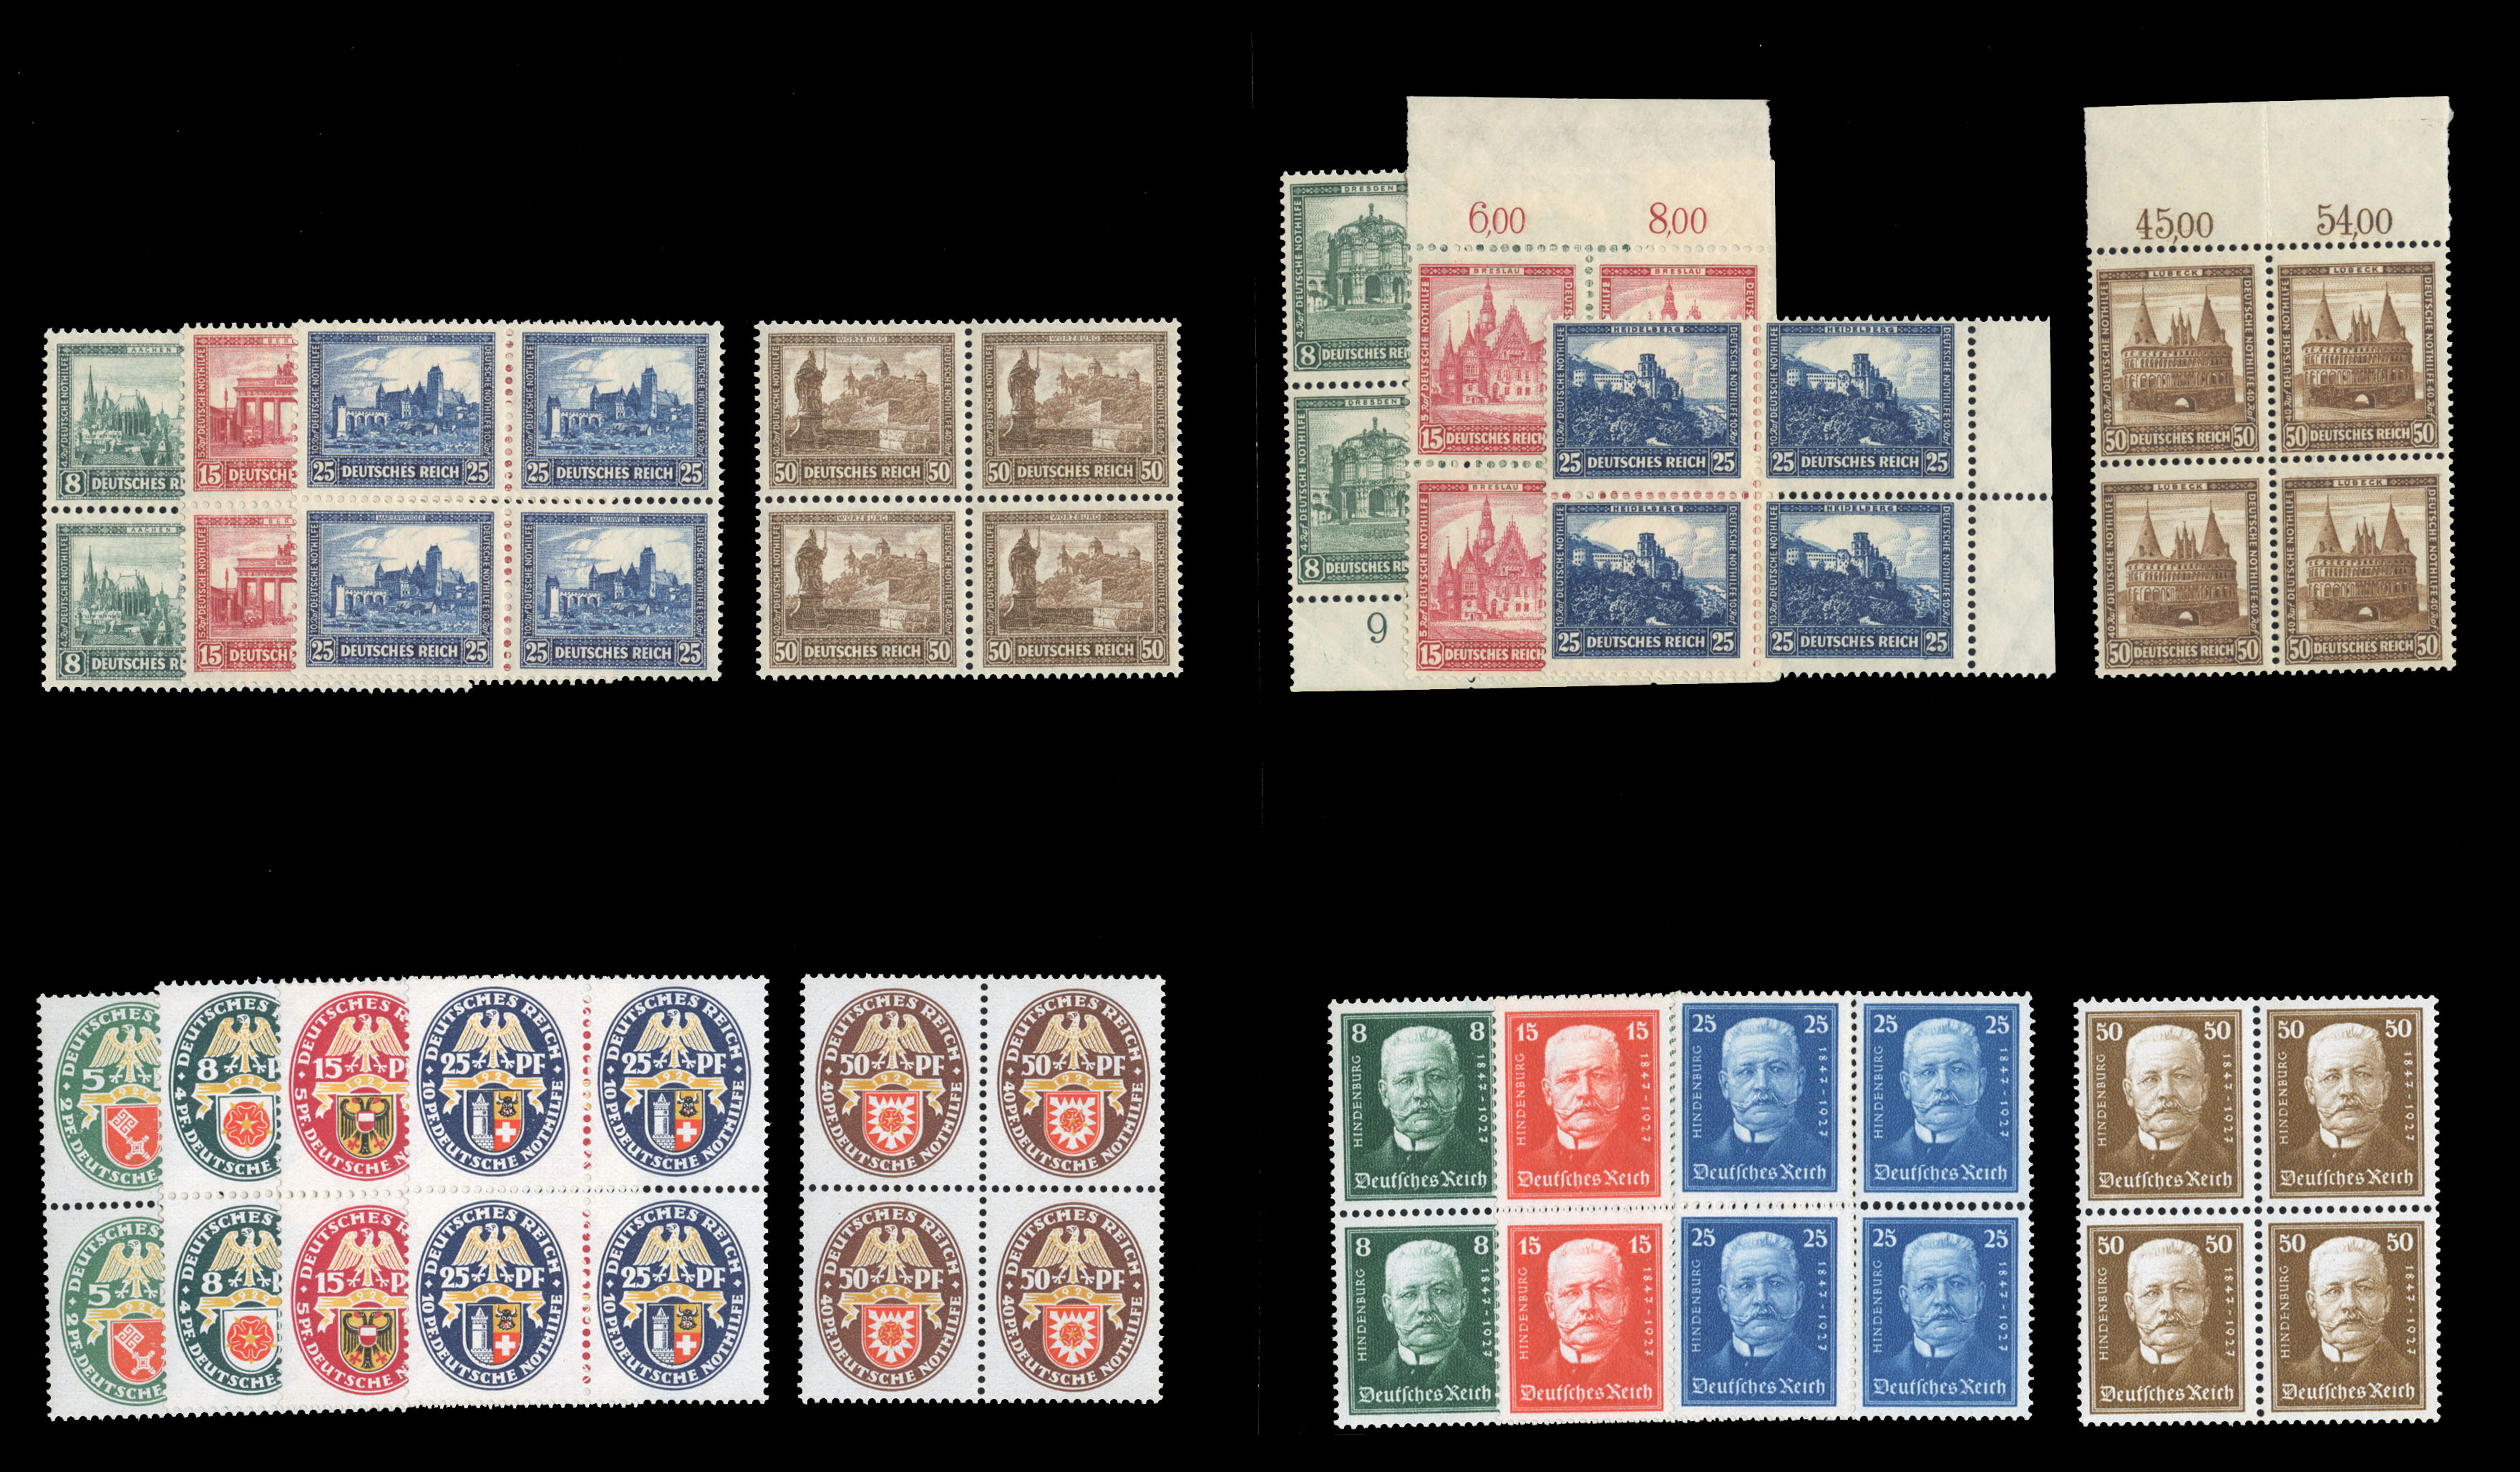 Lot 535 - BRITISH COMMONWEALTH KUWAIT  -  Cherrystone Auctions Rare Stamps & Postal History of the World